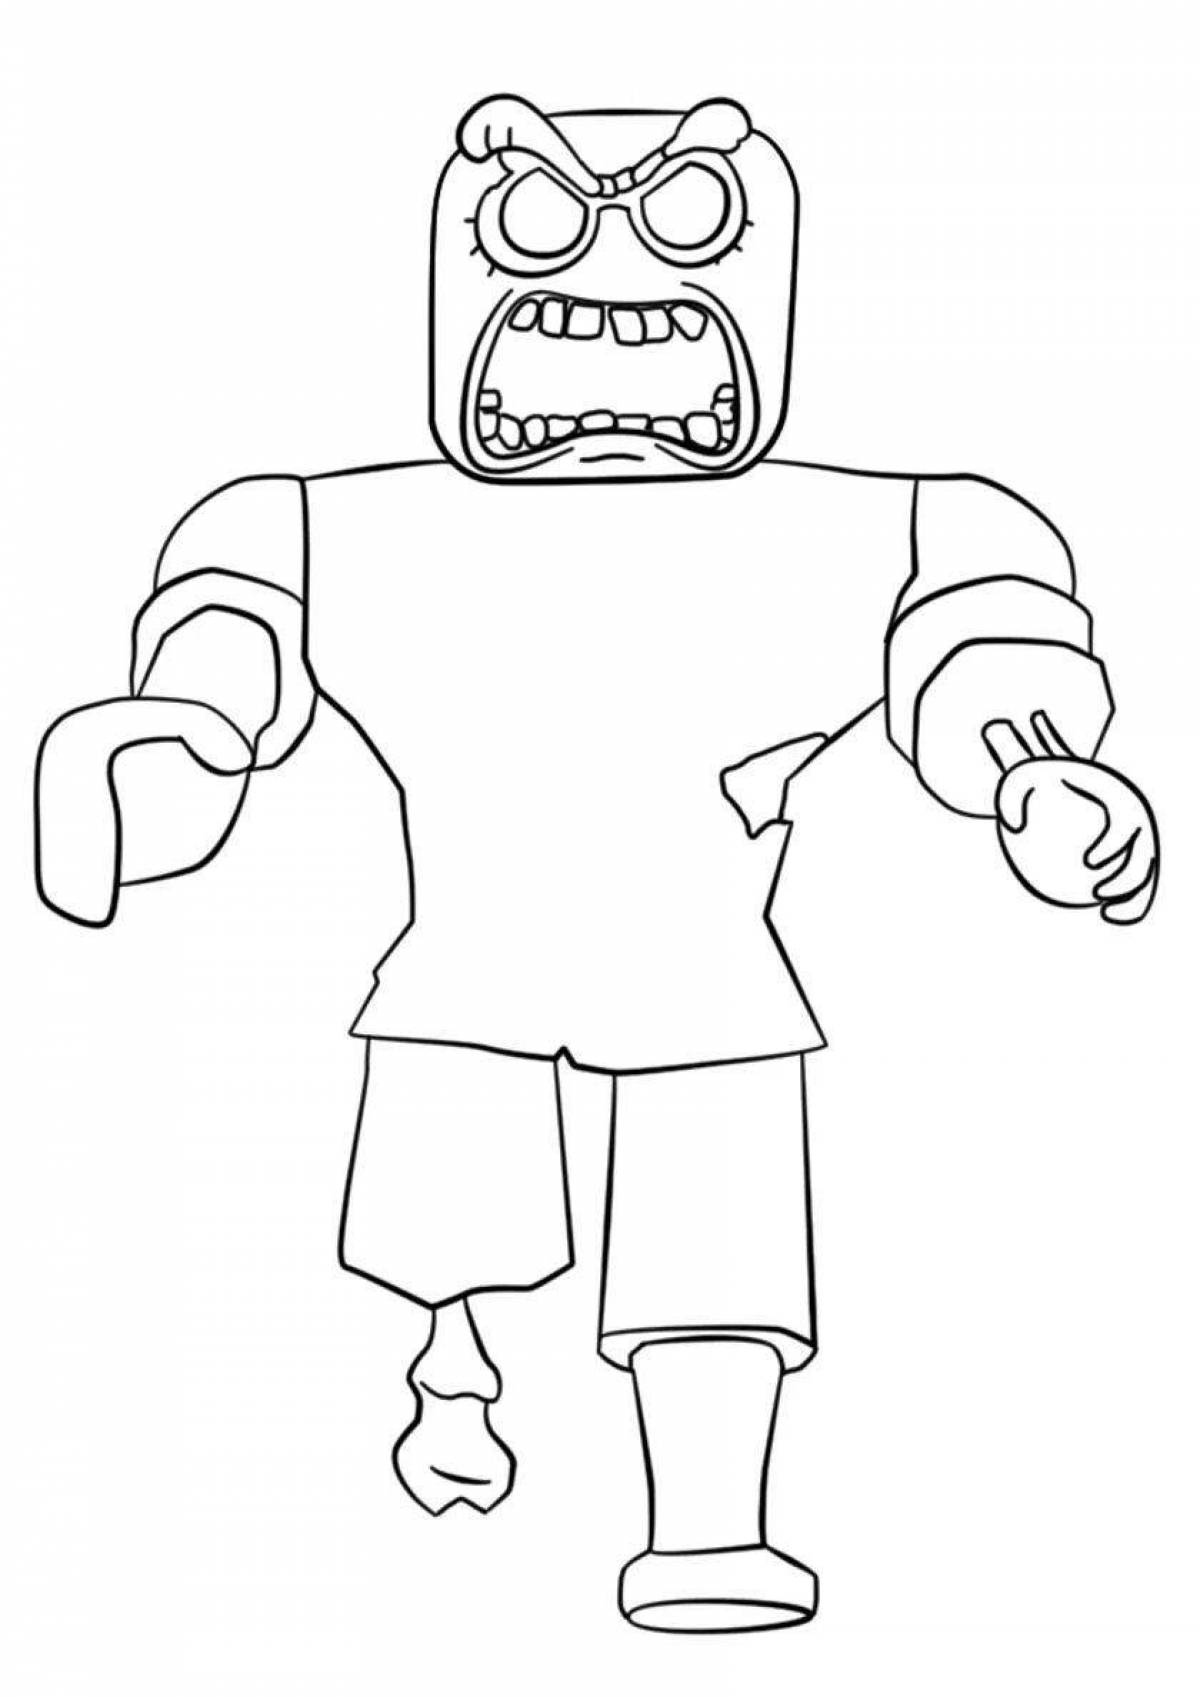 Exciting roblox monsters coloring book